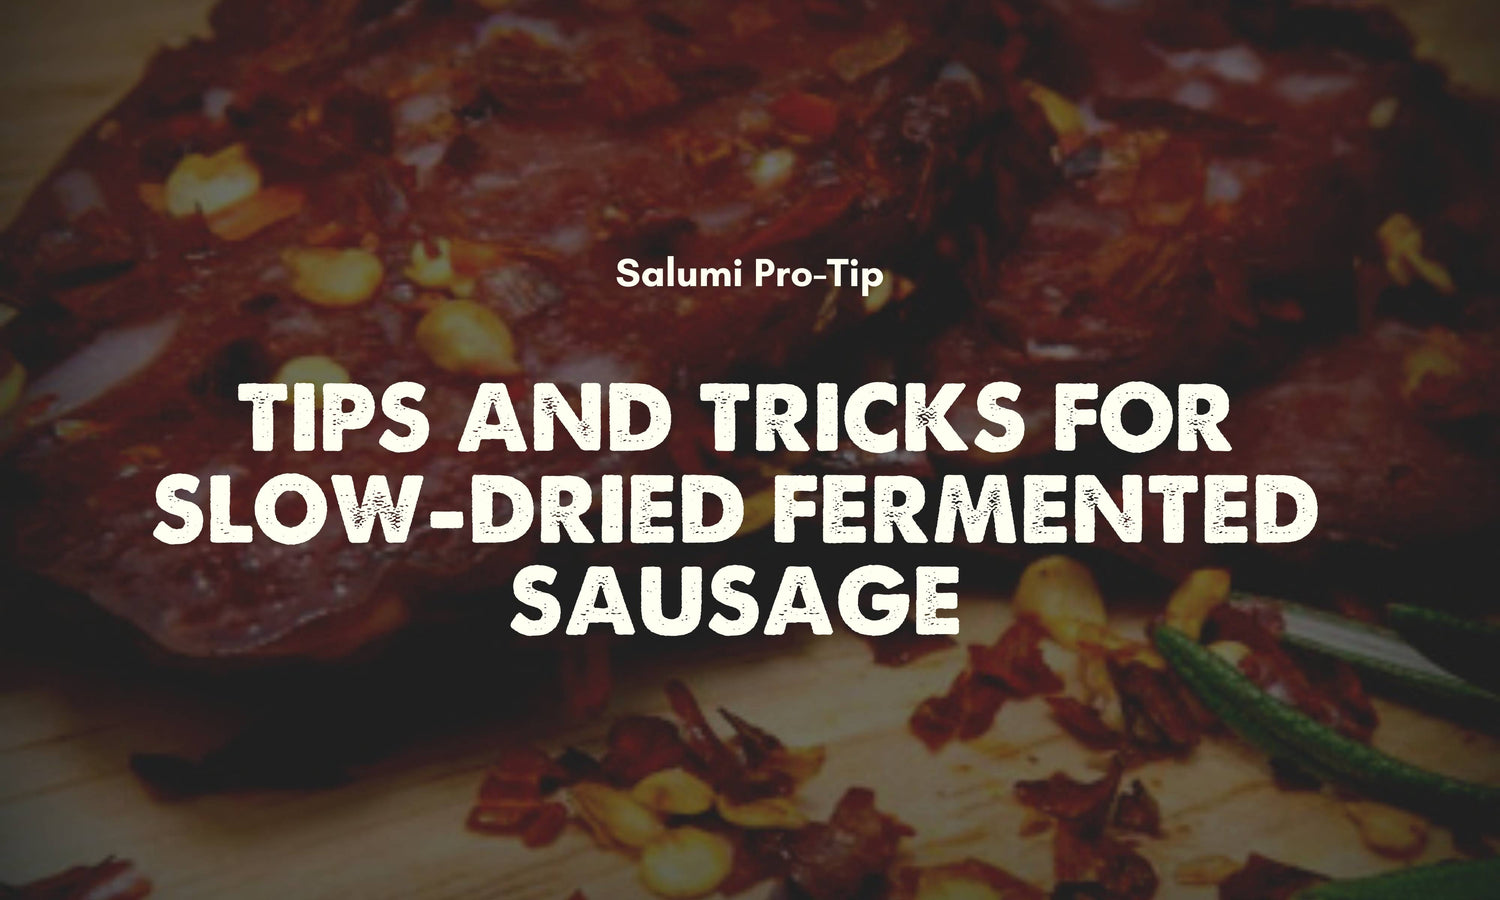 Salumi: Tips and Tricks for Slow-Dried Fermented Sausage